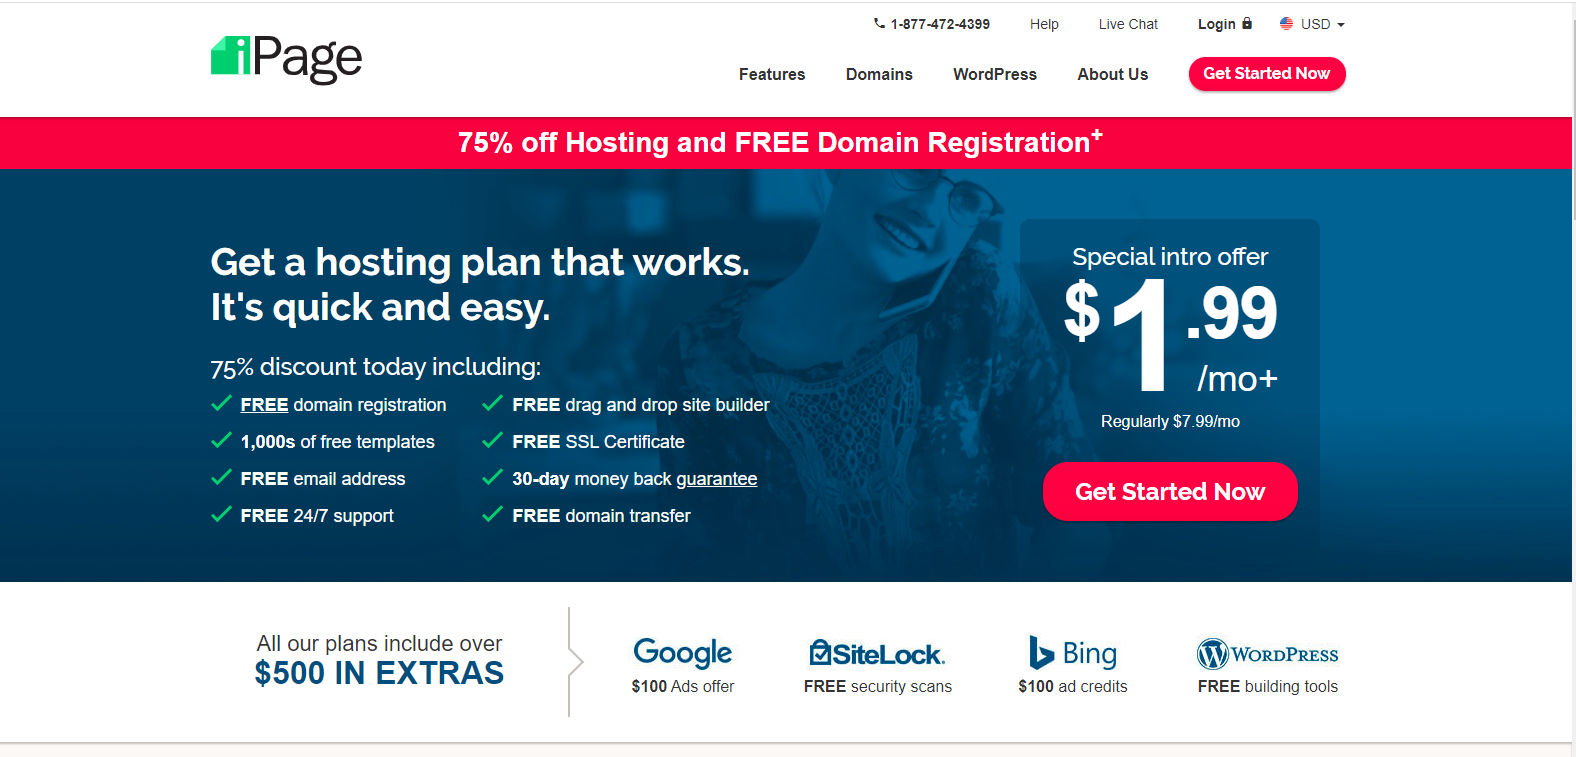 The Best 10 Web Hosting Providers For Your Small Business - Image 5